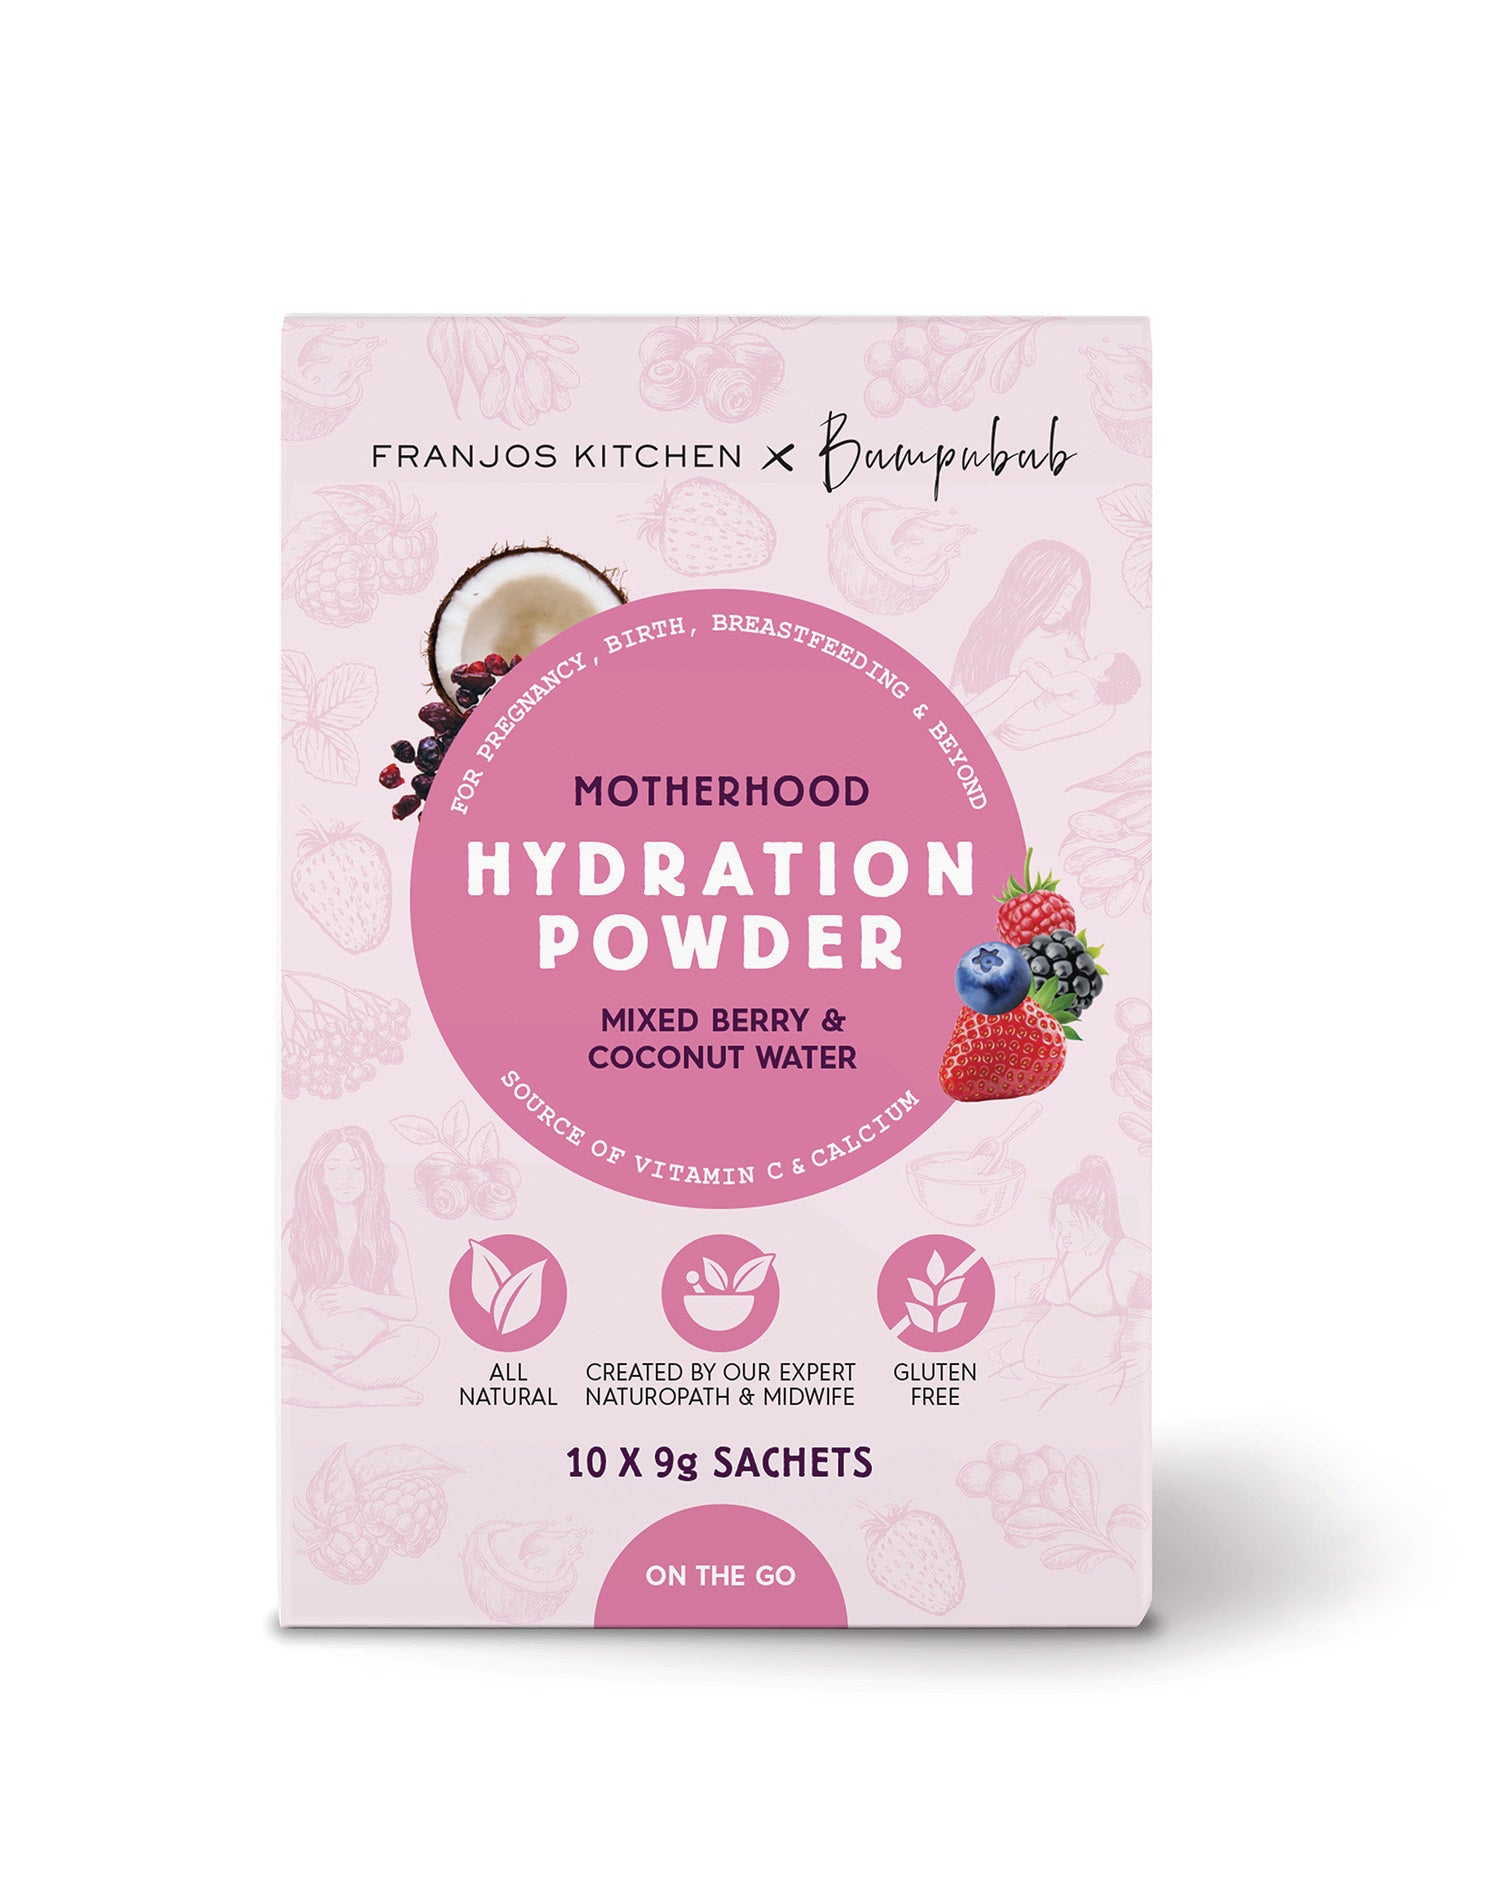 Franjo's Kitchen On-The-Go Mixed Berry Motherhood Hydration